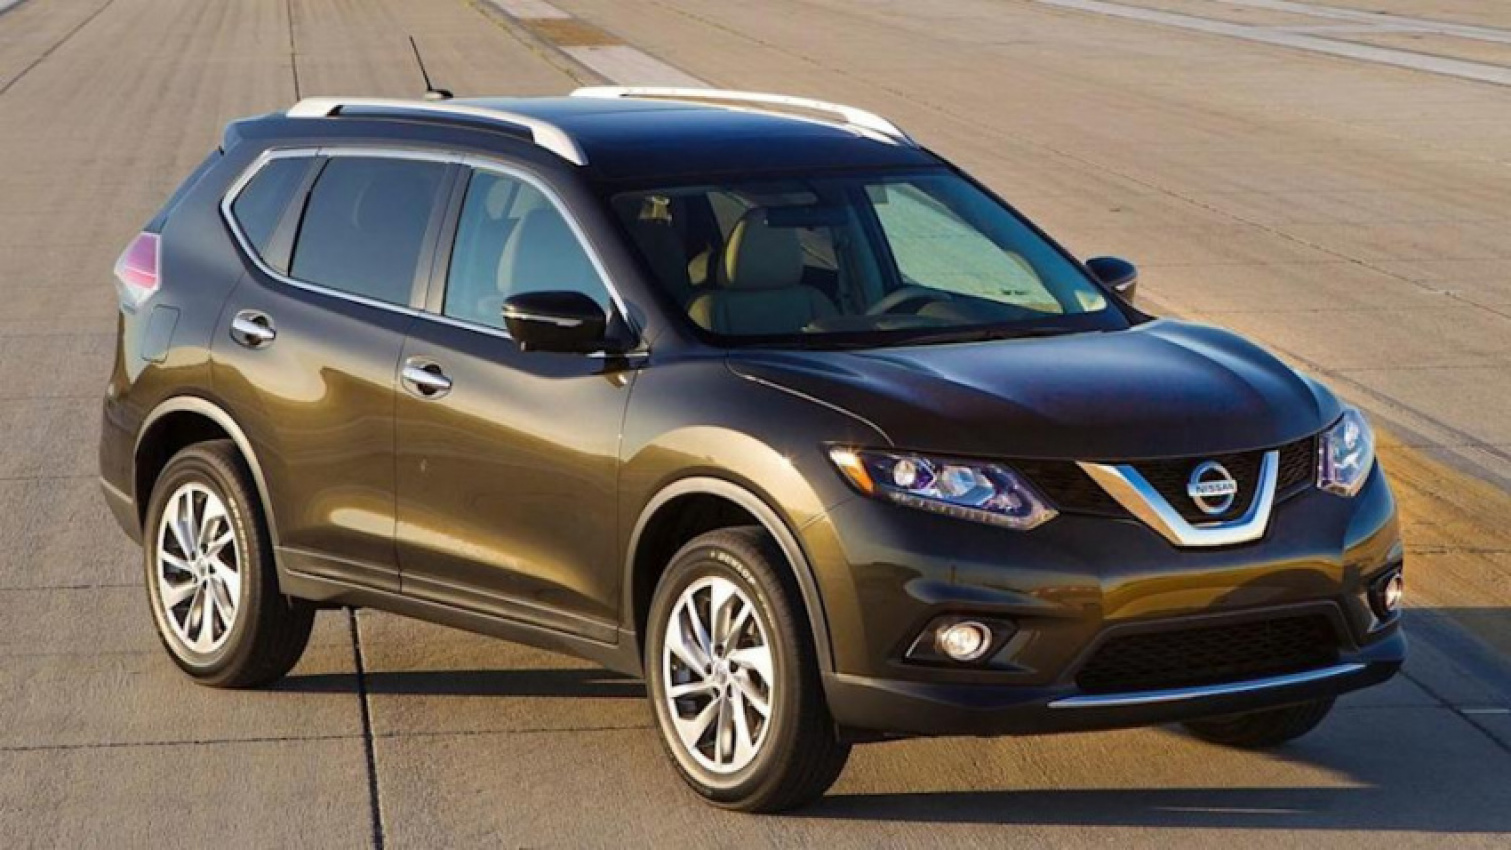 autos, nissan, nissan recalls nearly 800,000 rogues for potential fire risk